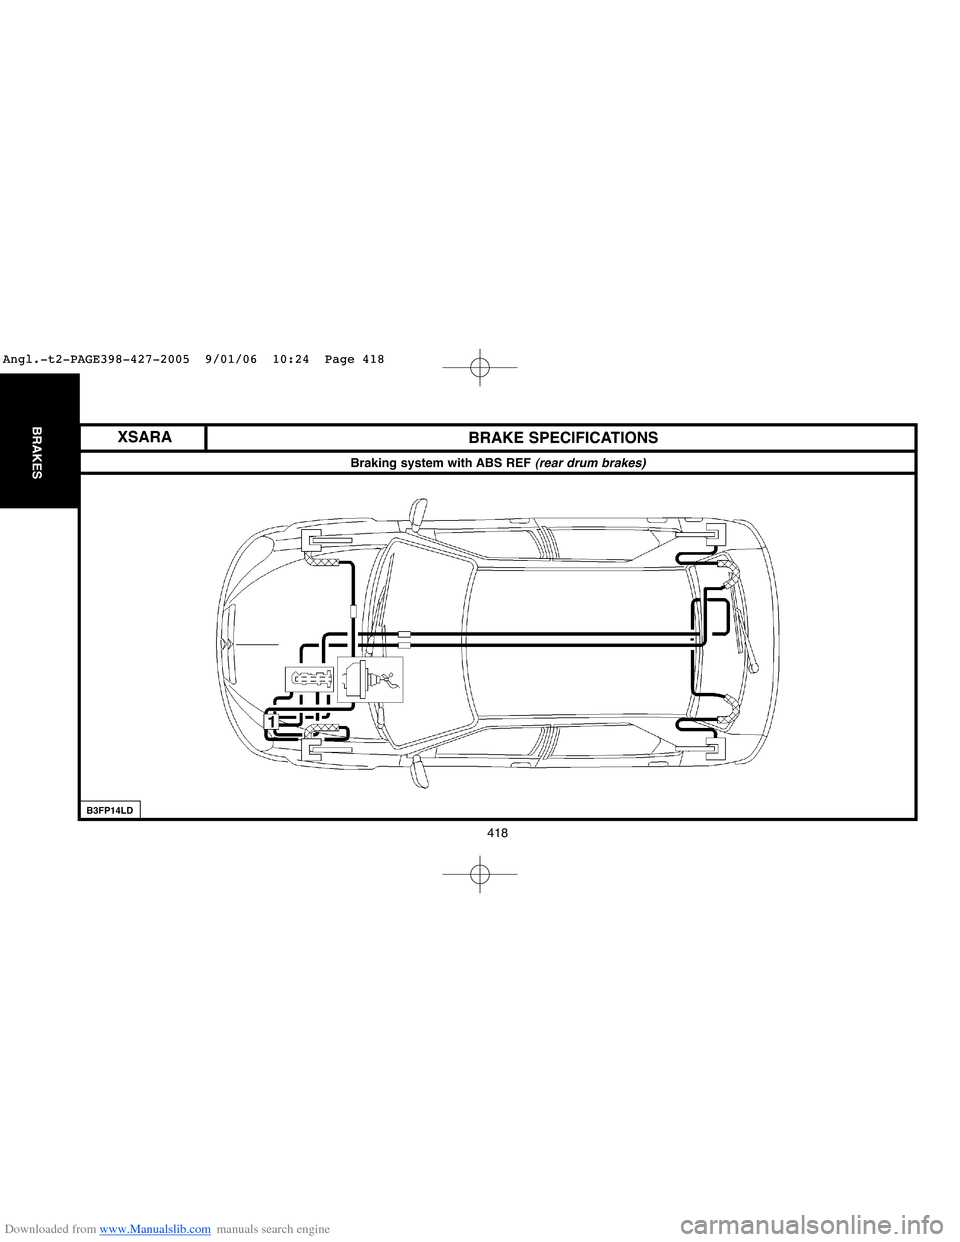 Citroen C4 2005 2.G User Guide Downloaded from www.Manualslib.com manuals search engine 418
BRAKES
Braking system with ABS REF (rear drum brakes)
BRAKE SPECIFICATIONS
B3FP14LD
XSARA
Angl.-t2-PAGE398-427-2005  9/01/06  10:24  Page 4